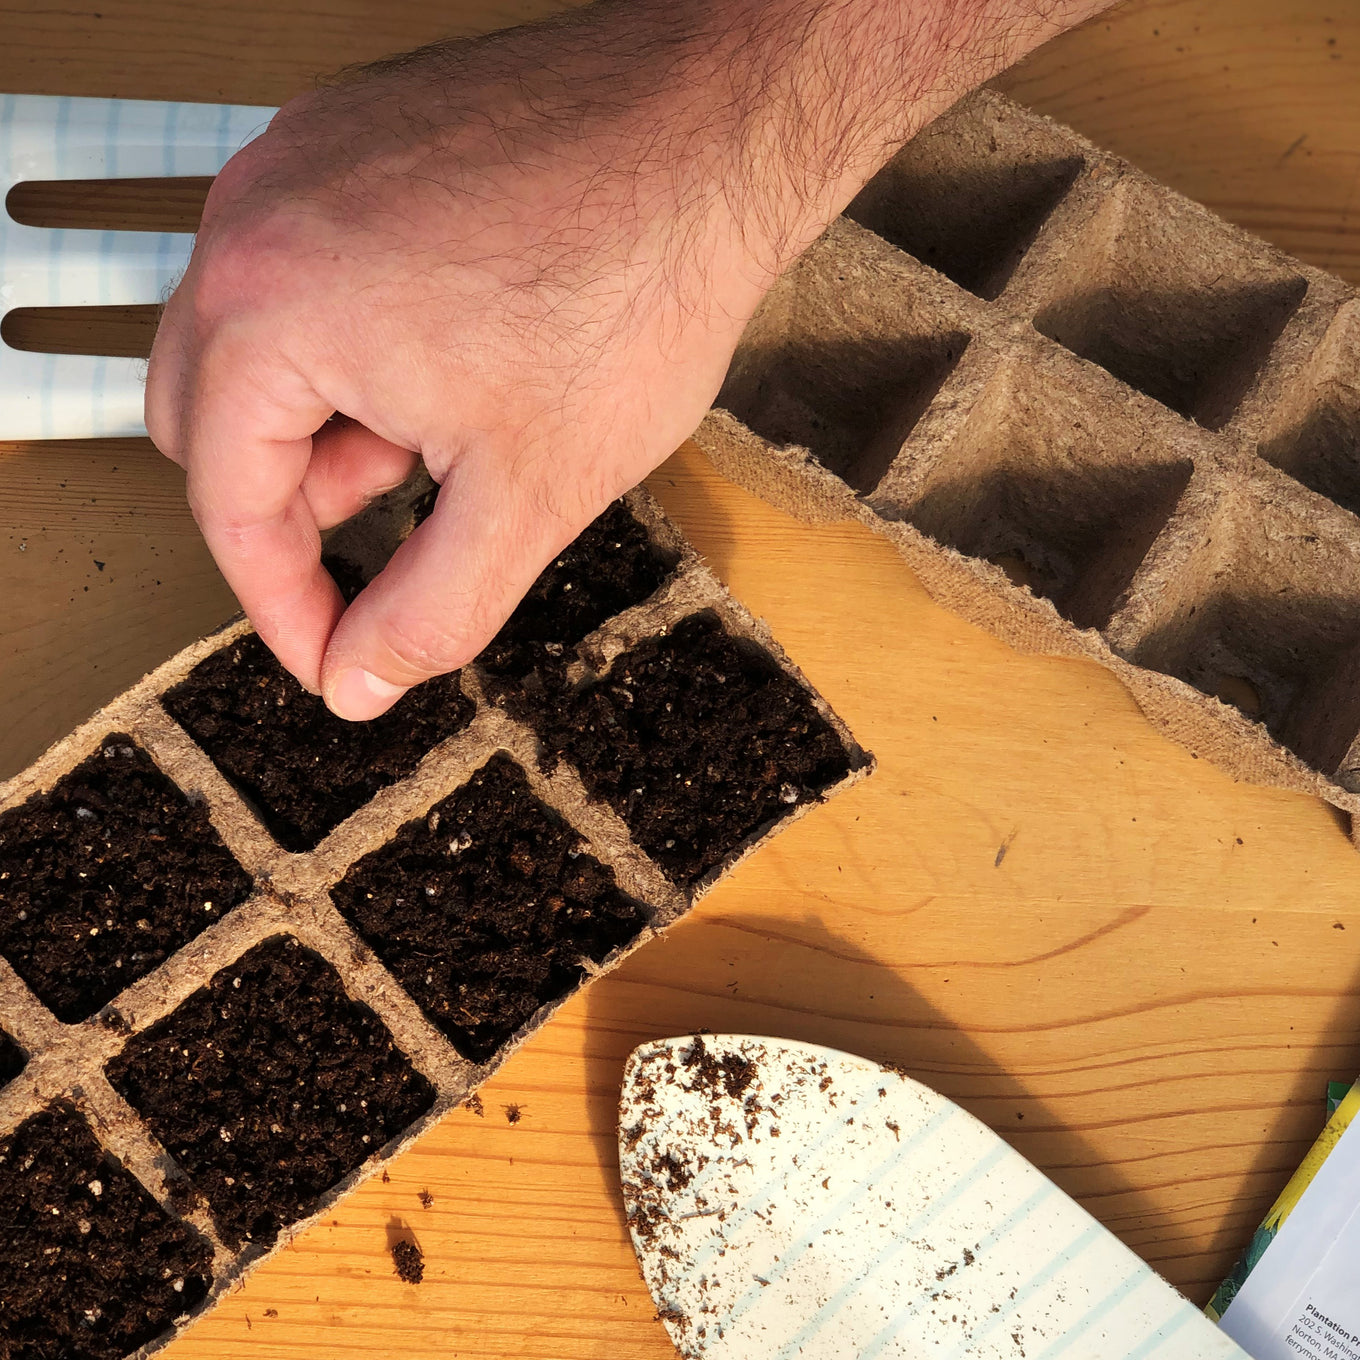 Plant your Garden Leader Monster Tomato seeds in biodegradable peat strip trays filled with Jiffy mix.